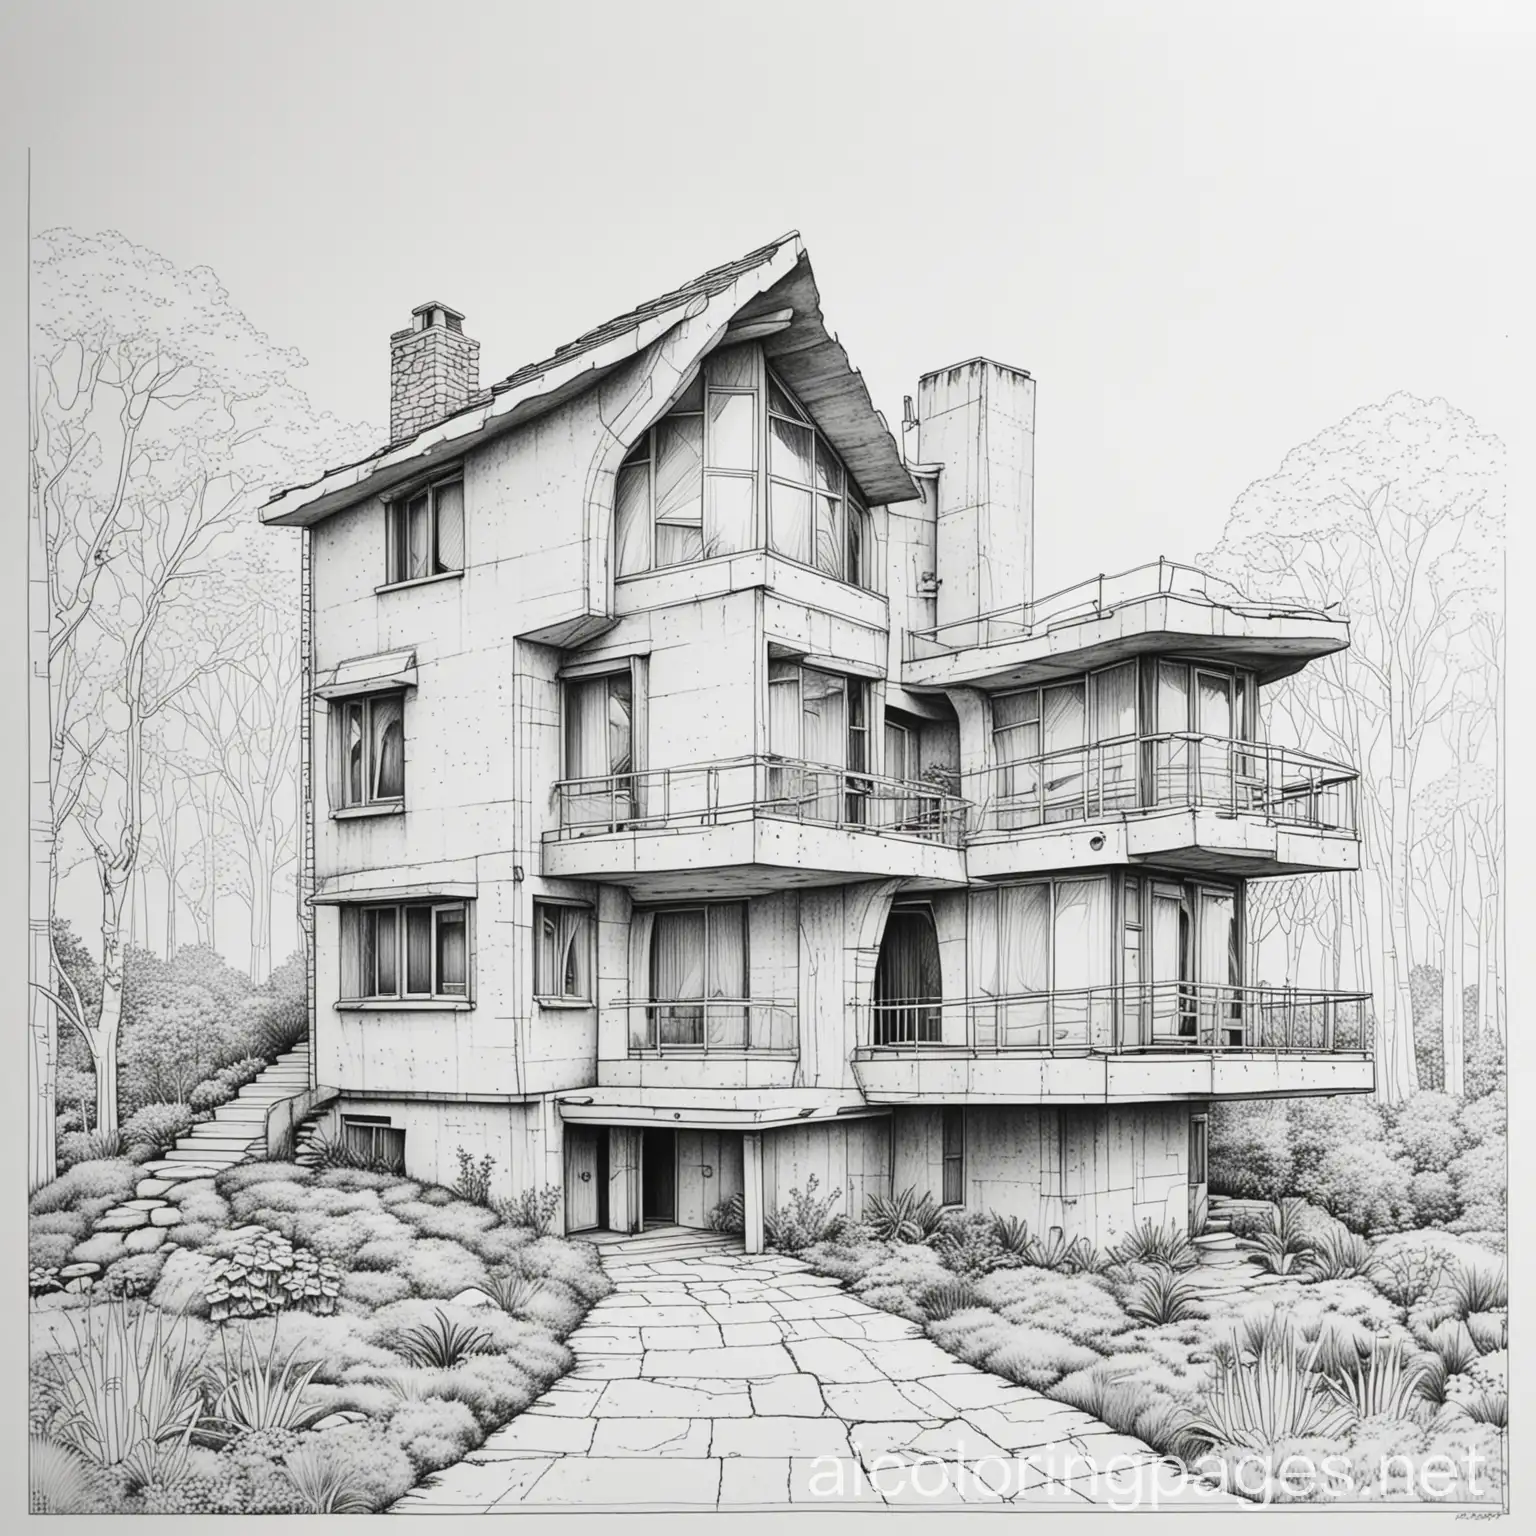 fairytale brutalist house, Coloring Page, black and white, line art, white background, Simplicity, Ample White Space. The background of the coloring page is plain white to make it easy for young children to color within the lines. The outlines of all the subjects are easy to distinguish, making it simple for kids to color without too much difficulty